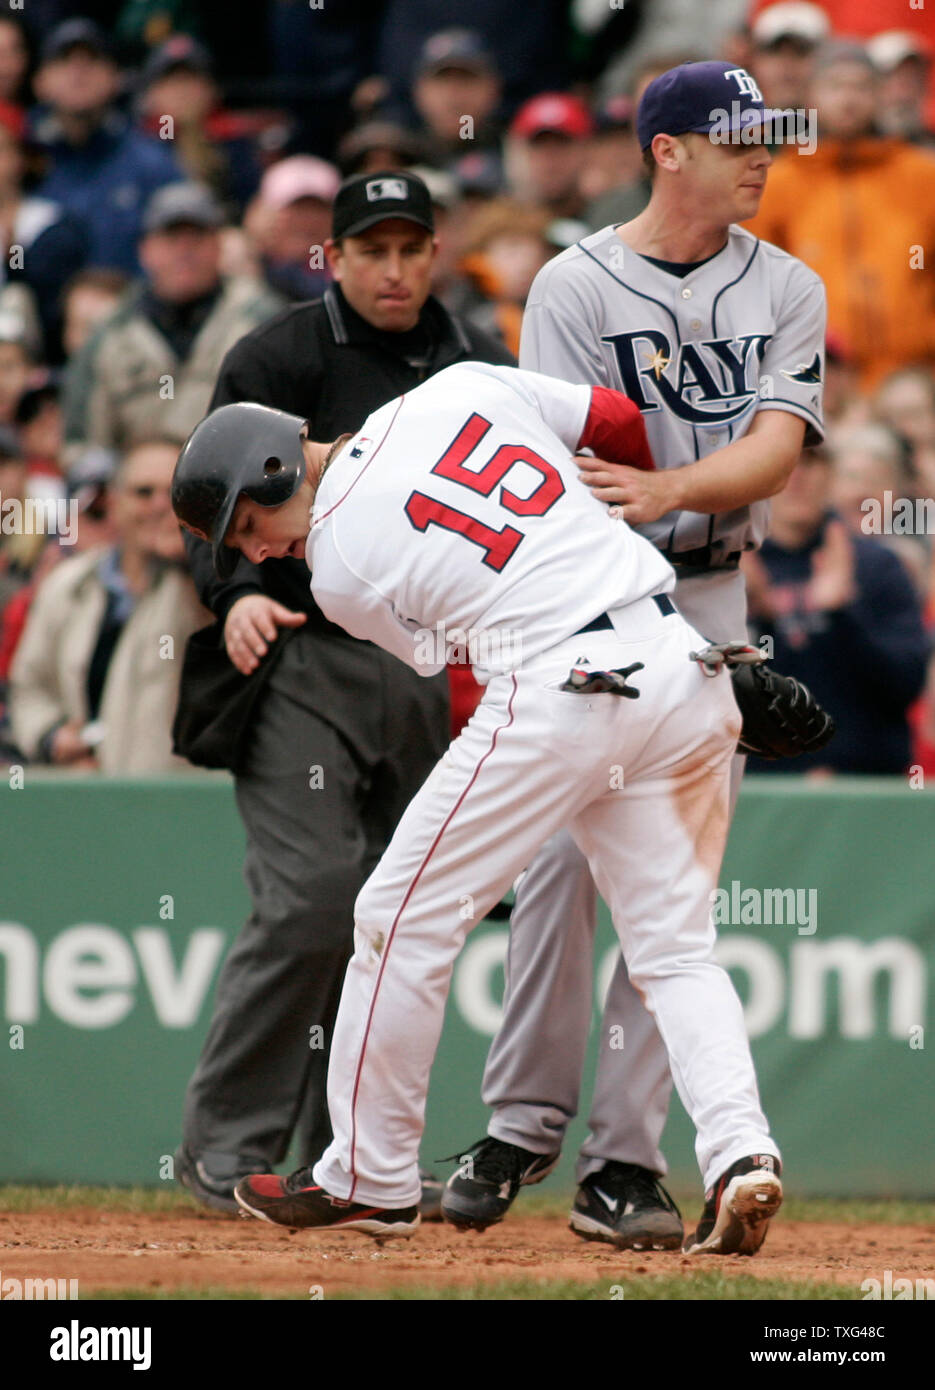 Boston Red Sox base runner Dustin Pedroia (L) bumps into Tampa Bay Rays pitcher Scott Kazmir to score on a wild pitch in the third inning at Fenway Park in Boston, Massachusetts on May 4, 2008.  Umpire Chris Guccione looks on in the background. (UPI Photo/Matthew Healey) Stock Photo